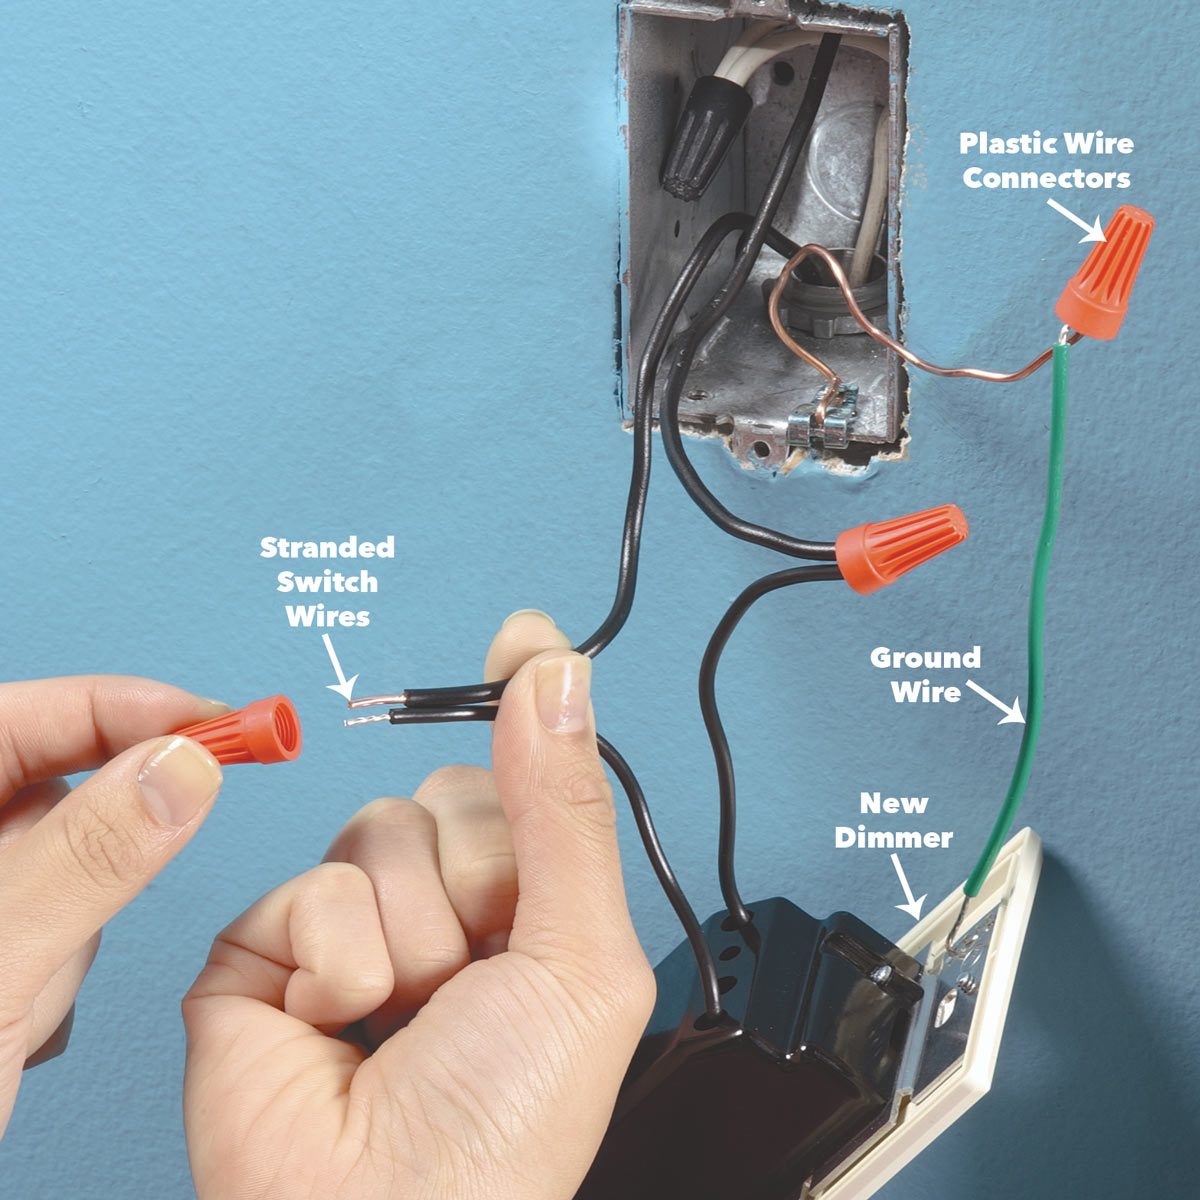 How To Install A Dimmer Light Switch  Wiring And Replacement